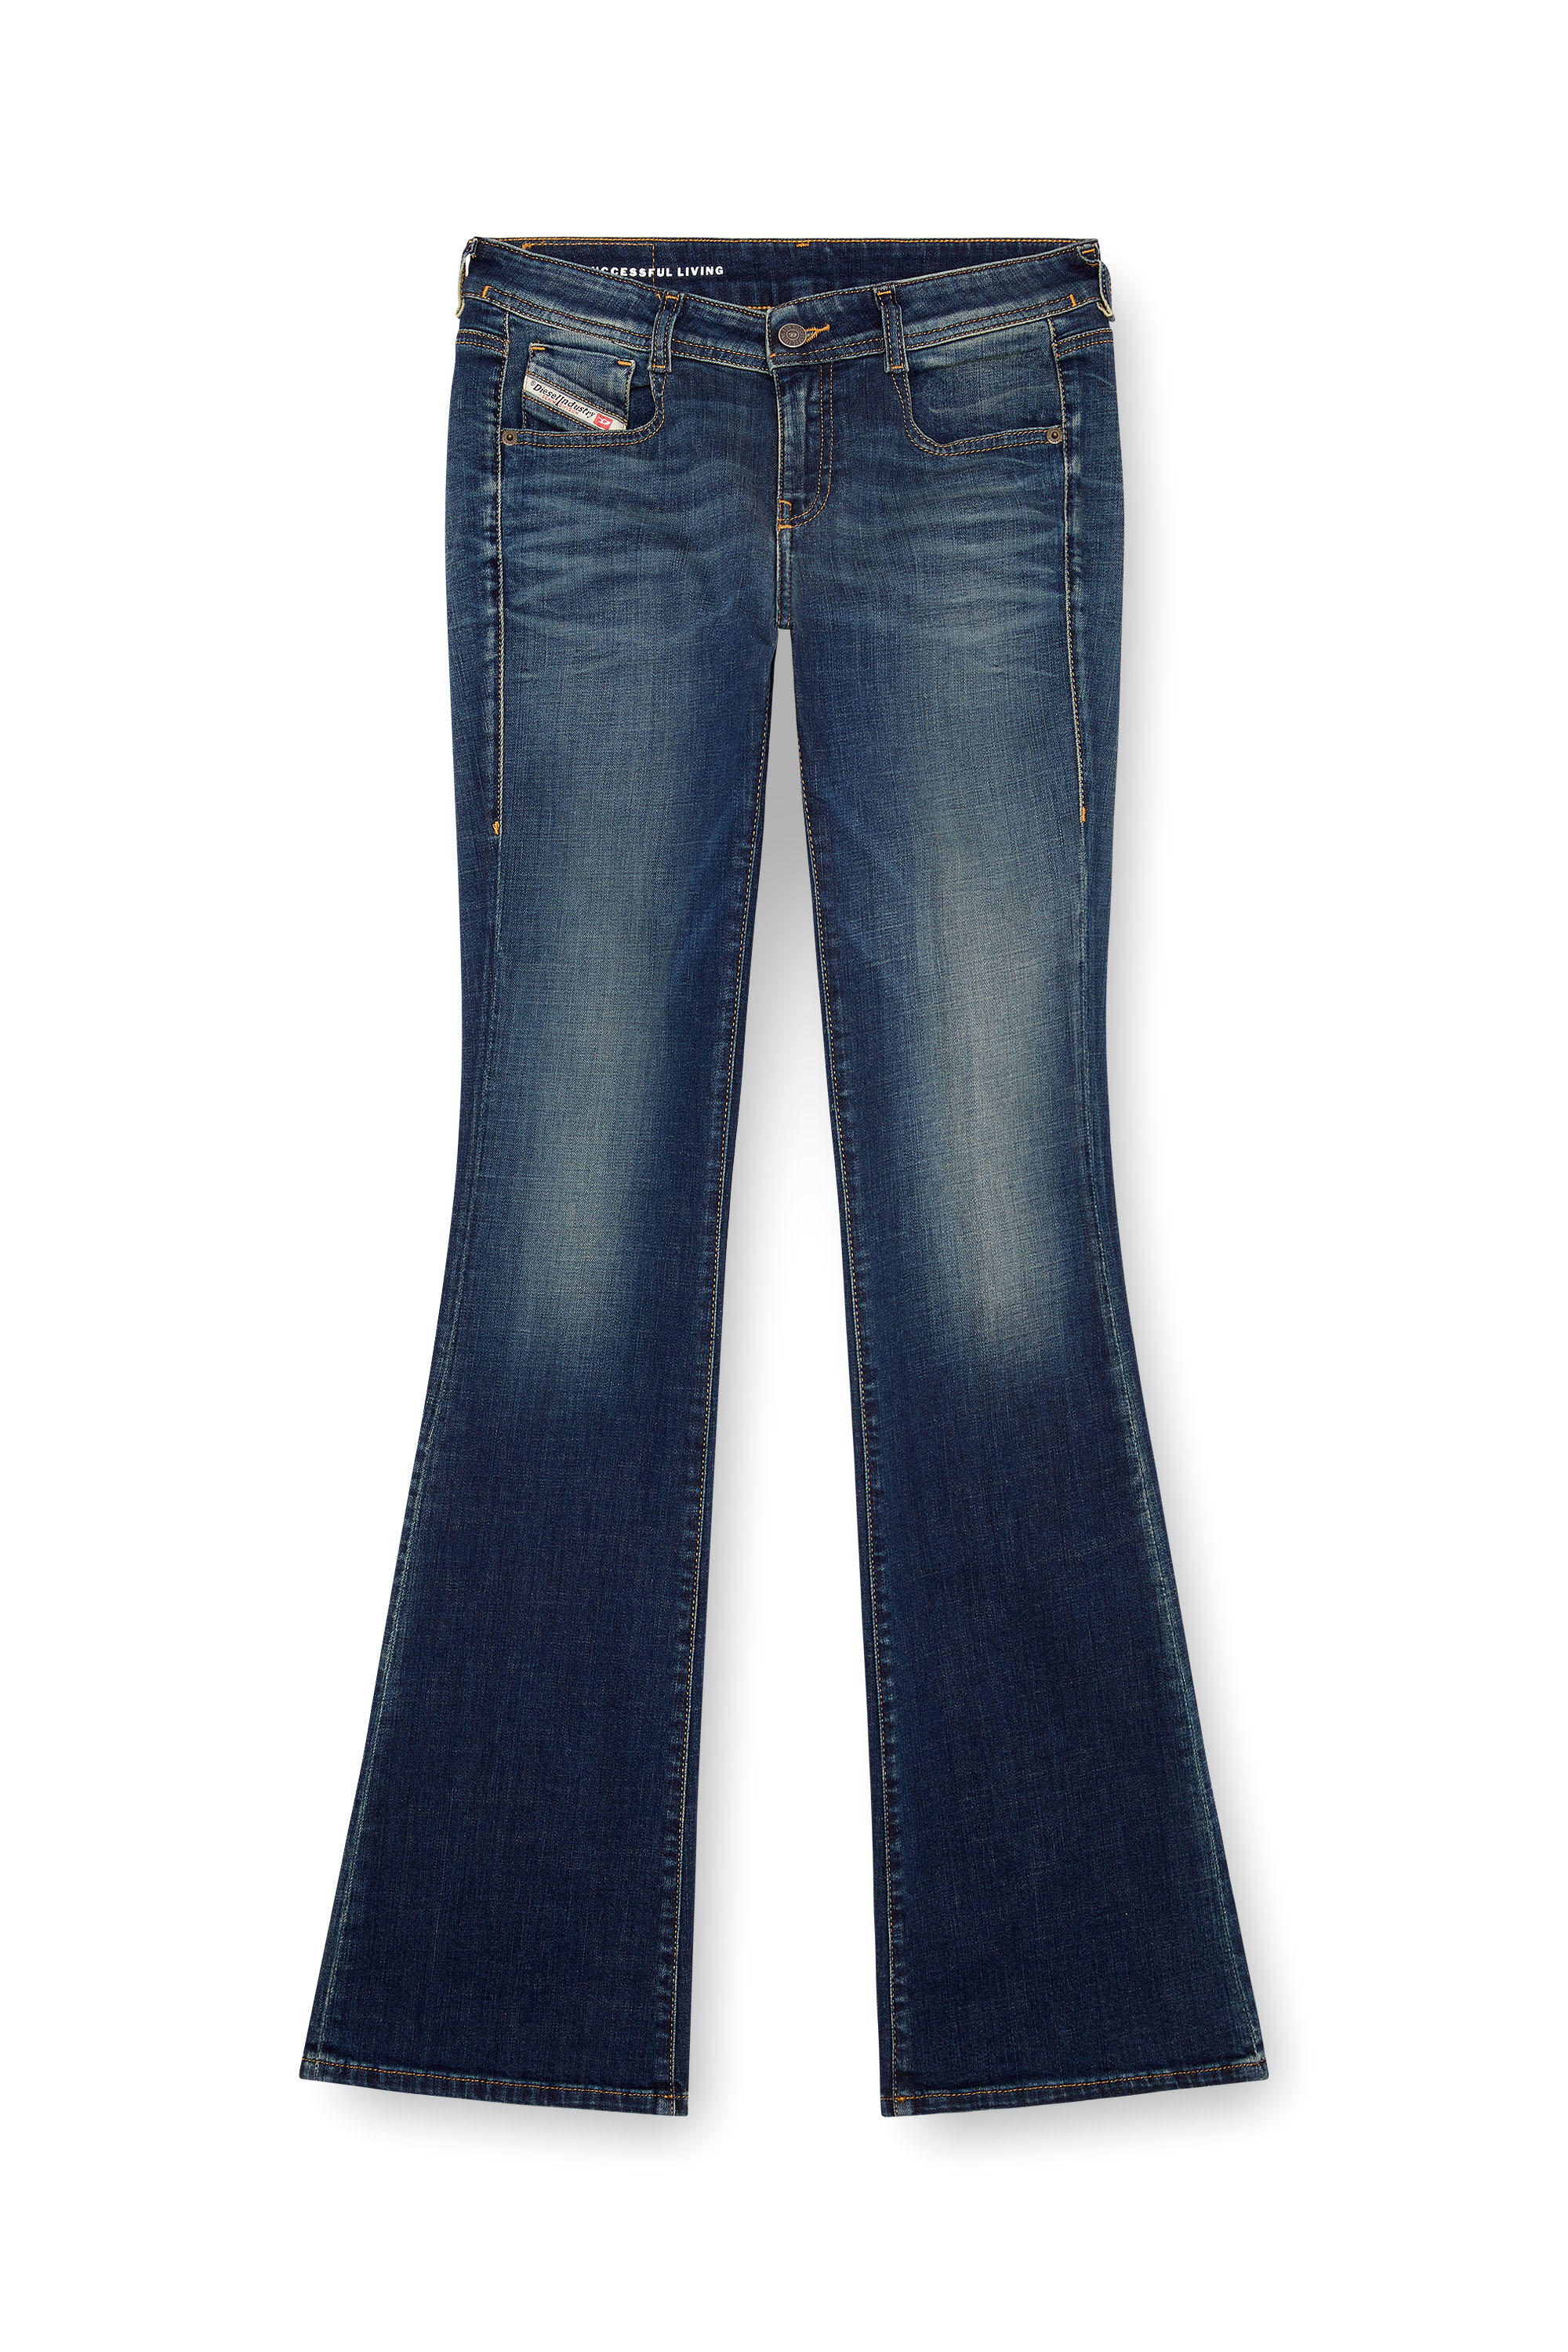 Diesel - Bootcut and Flare Jeans 1969 D-Ebbey 09J20, Mujer Bootcut y Flare Jeans - 1969 D-Ebbey in Azul marino - Image 1